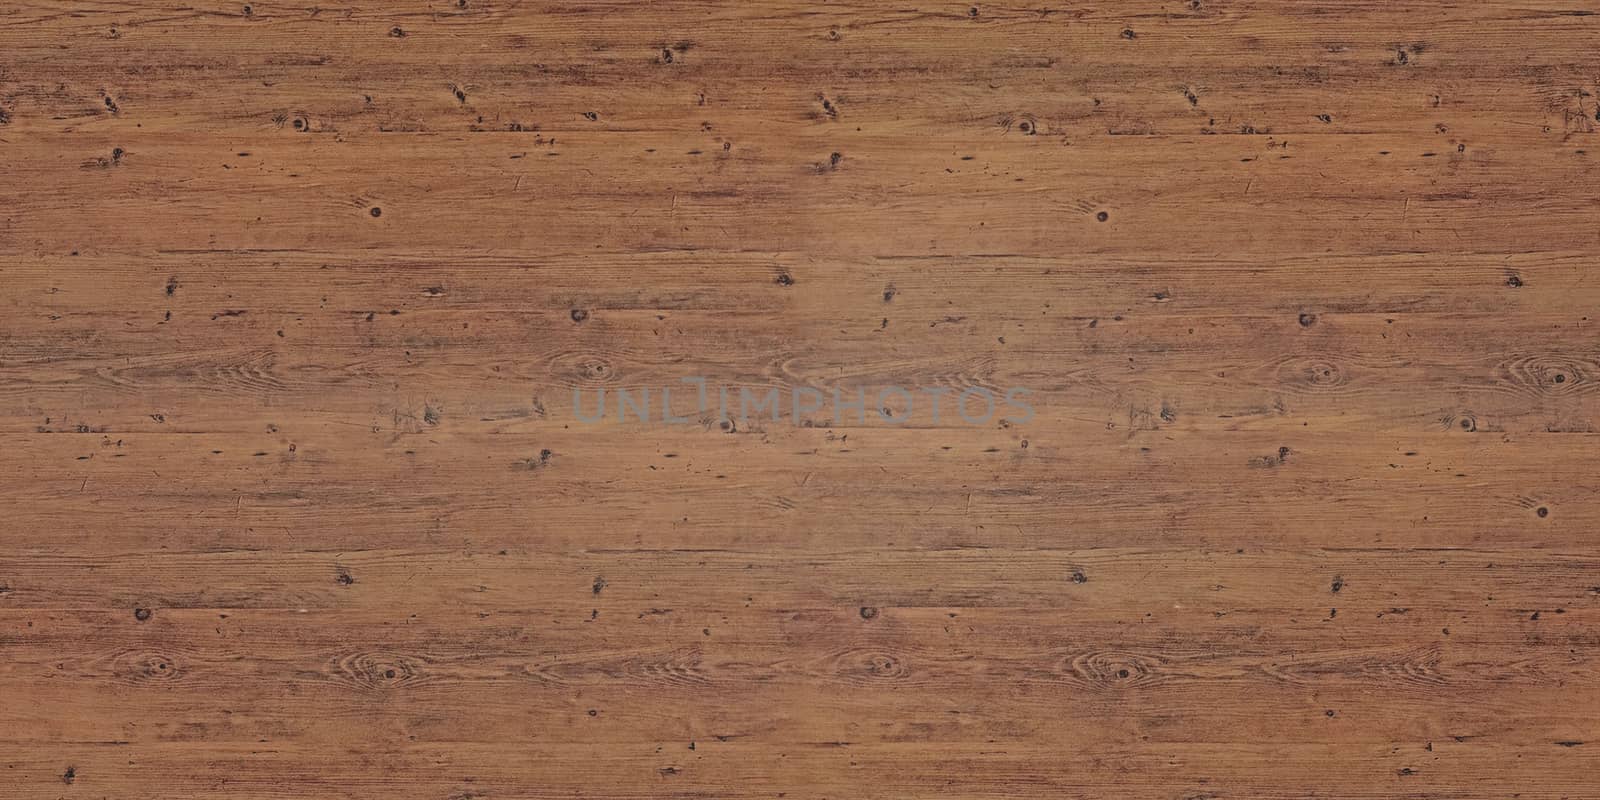 Wooden floor with brown Board texture and red tint